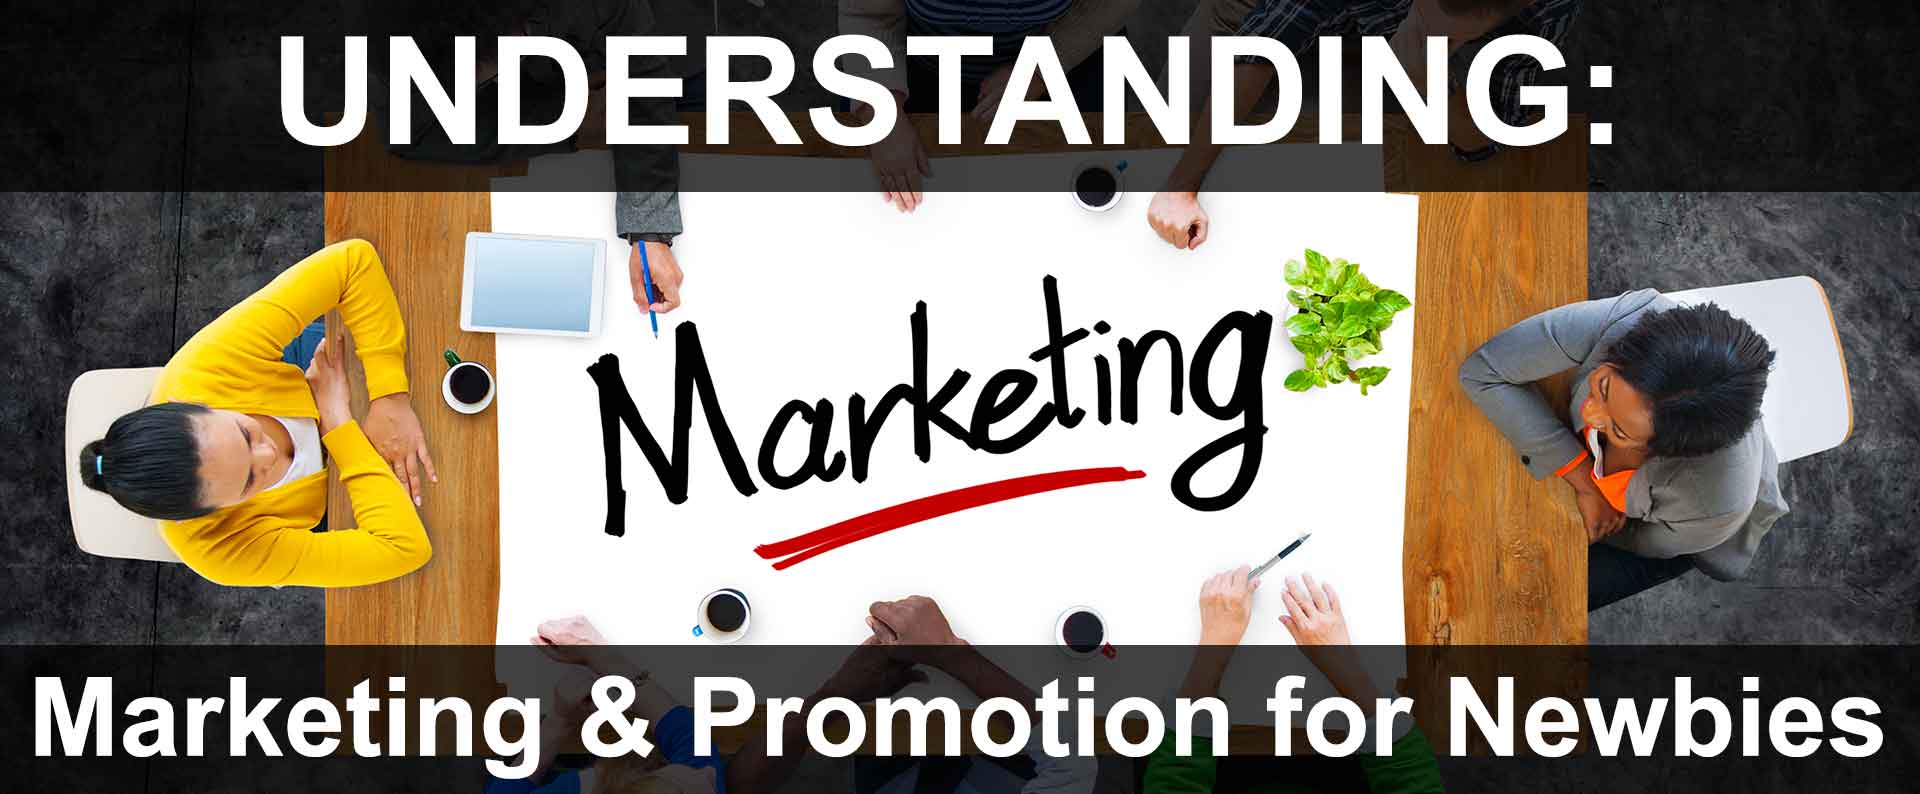 Marketing & Promotion for Newbies